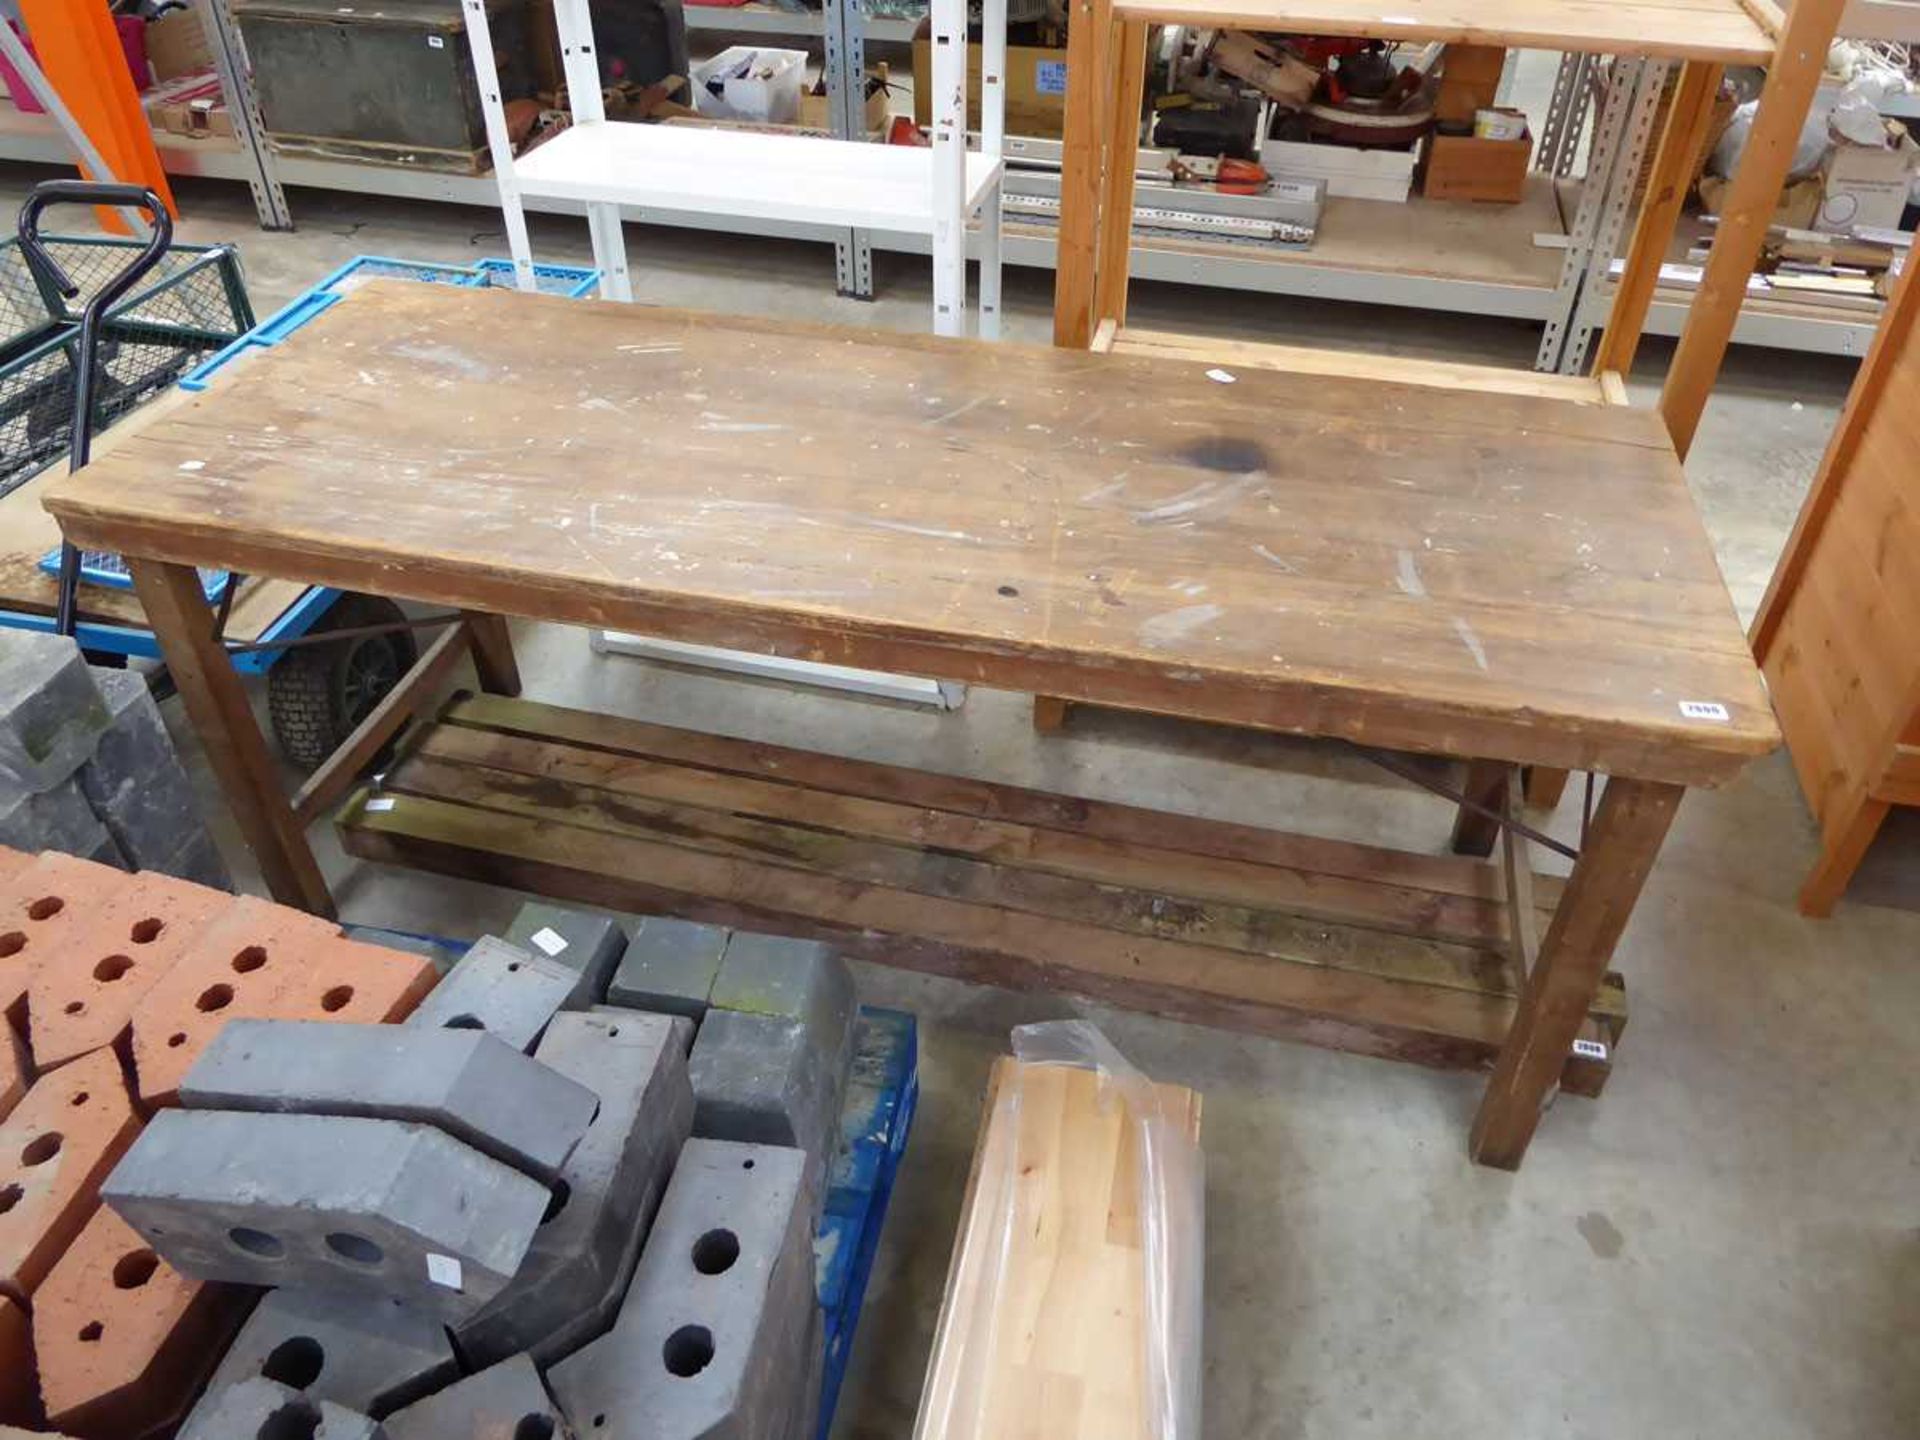 Wooden collapsible work bench